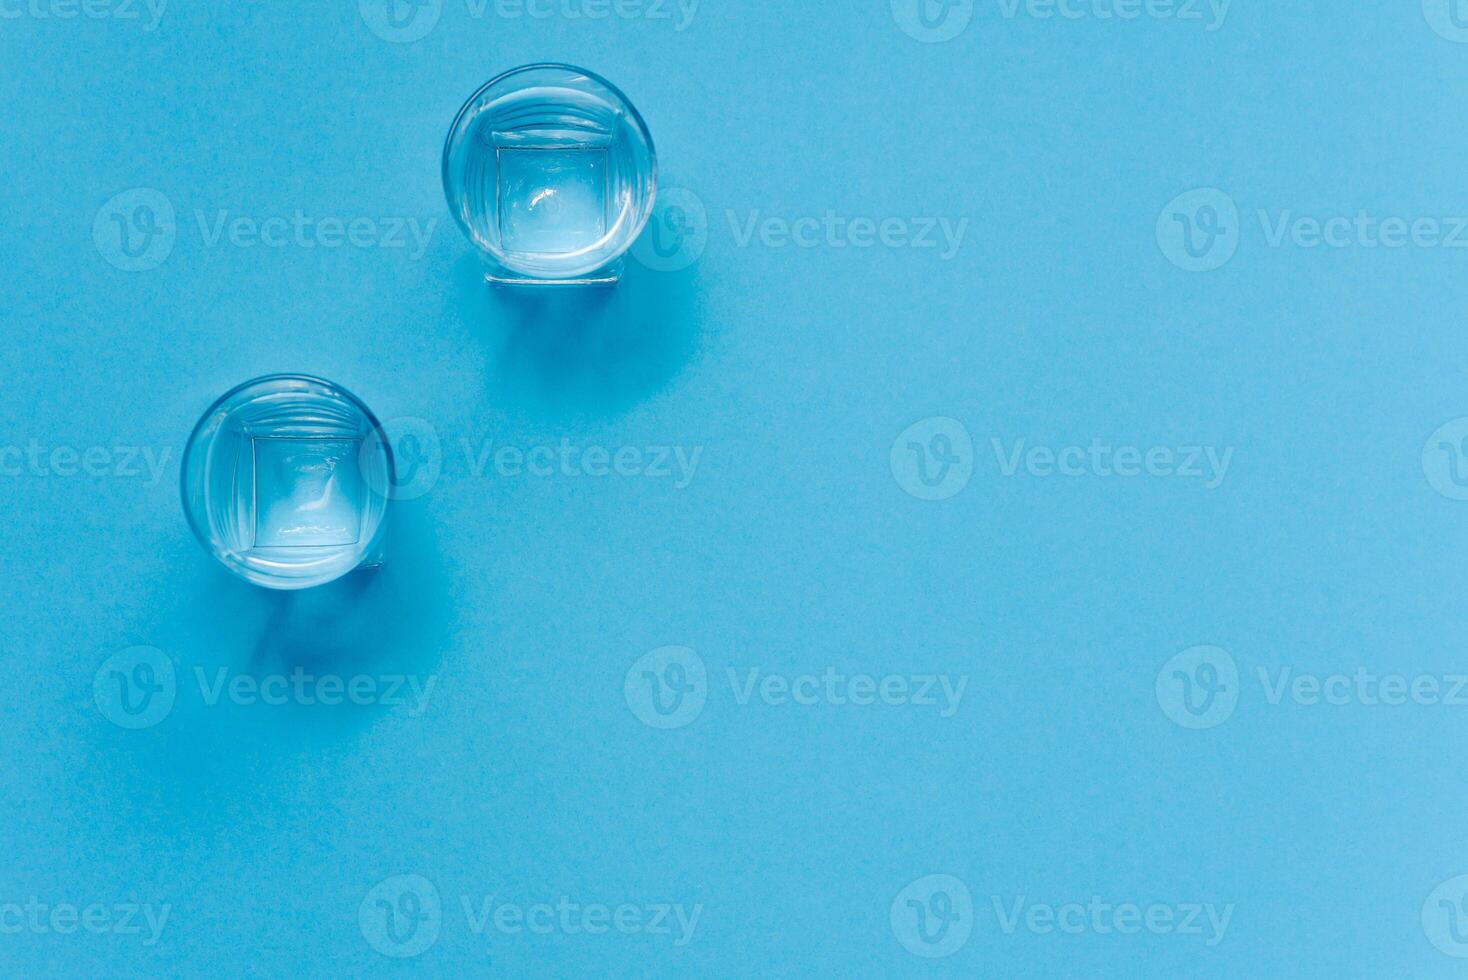 Glasses of water on a paper background. Drawing shadows. Classic Blue color. clean water concept photo